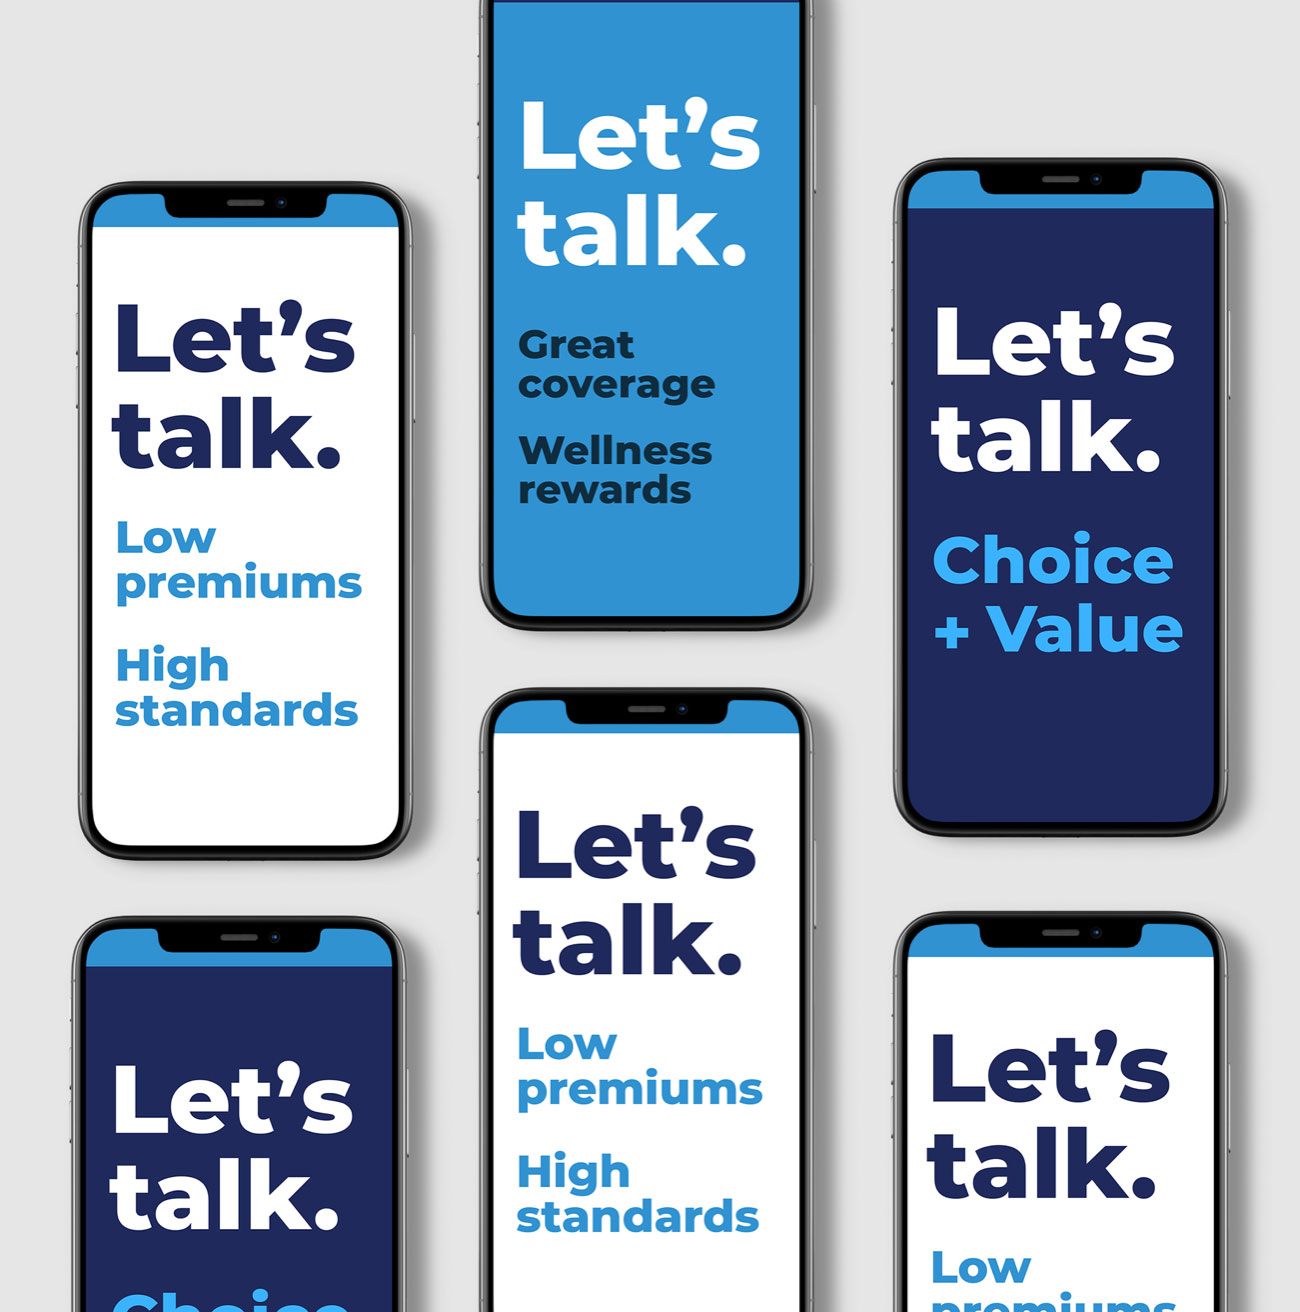 cell phones laid on on a table, all screens have title - Let's talk.